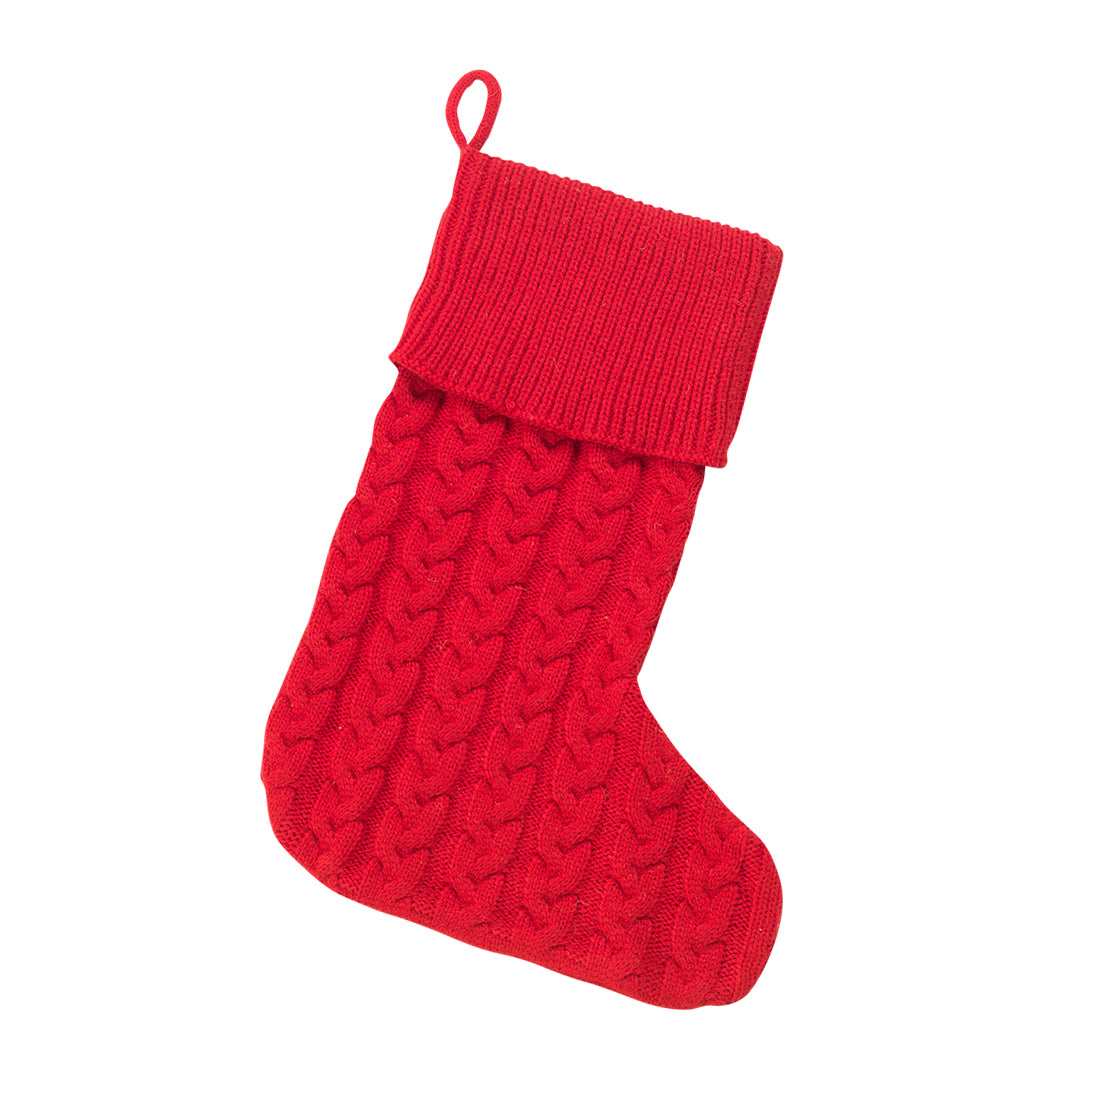 Classic Cable Knit Christmas Stocking in Red - with Monogram,Christmas stocking - Dirt Road Divas Boutique